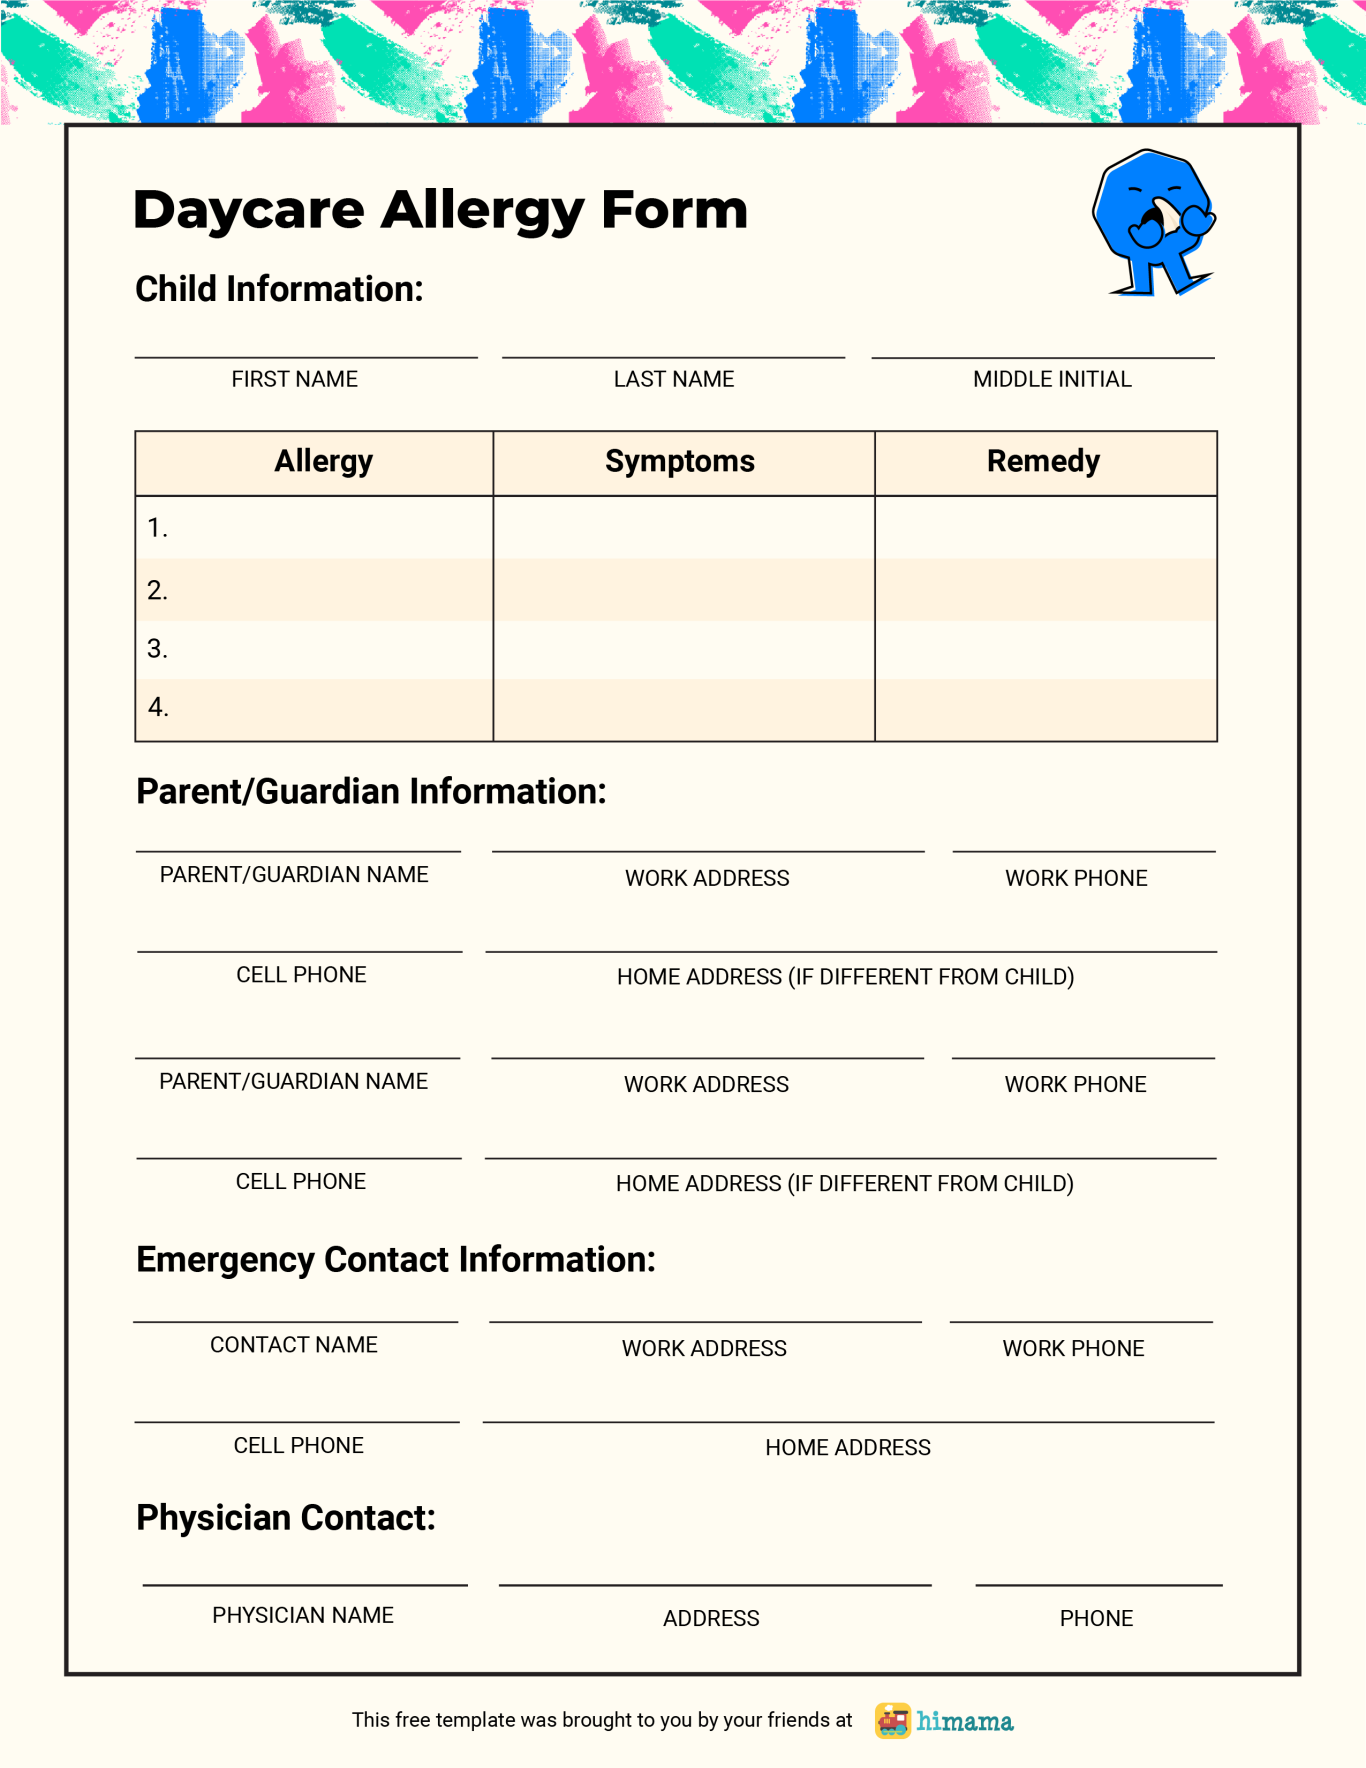 daycare-allergy-form-free-templates-himama